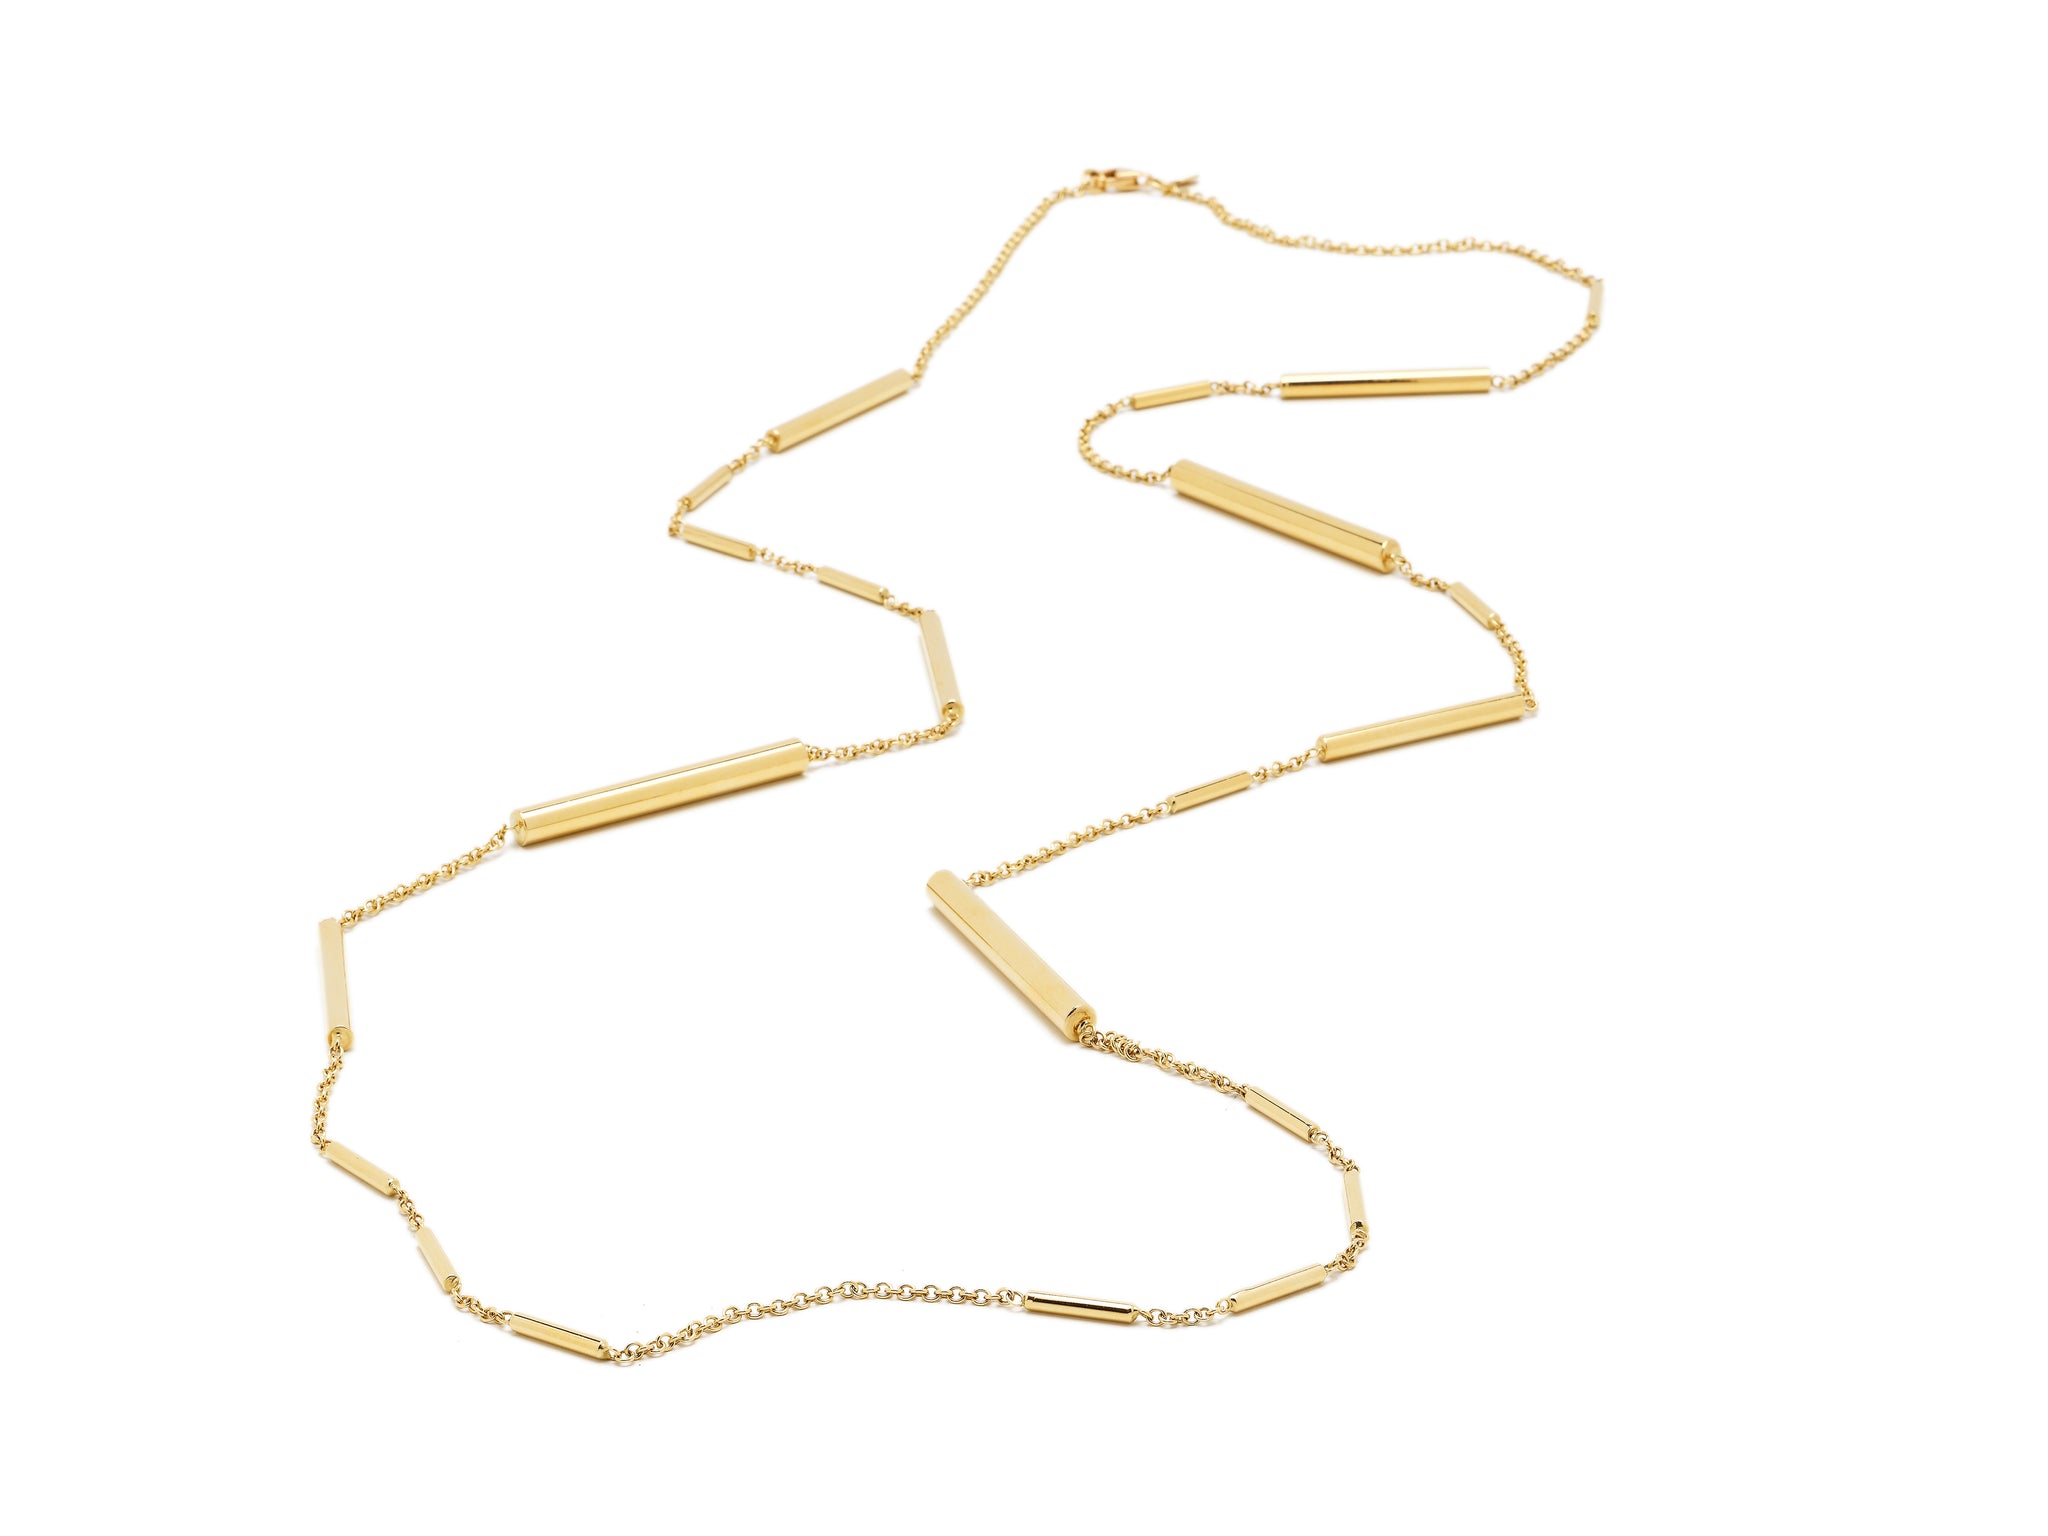 18 krt yellow gold chain with gold sticks (96 cm)